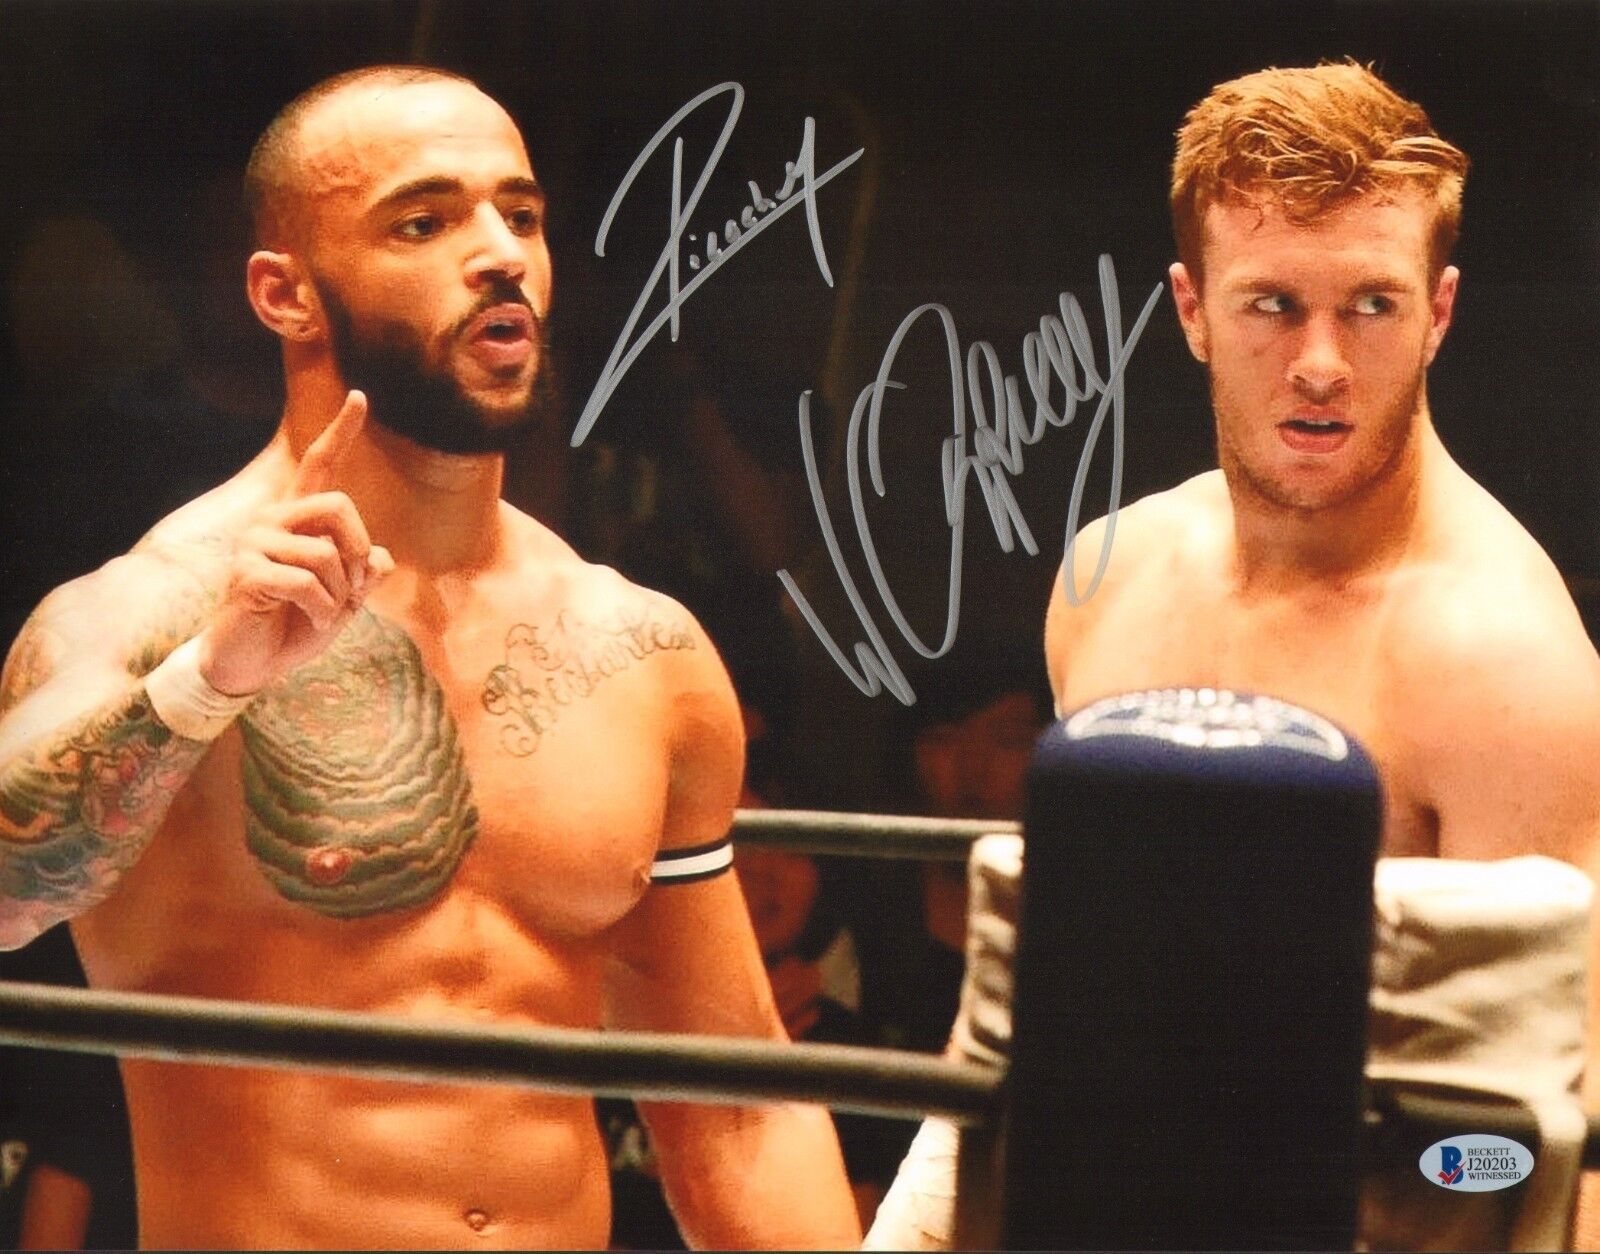 Ricochet & Will Ospreay Signed 11x14 Photo Poster painting BAS COA New Japan Pro Wrestling WWE 5